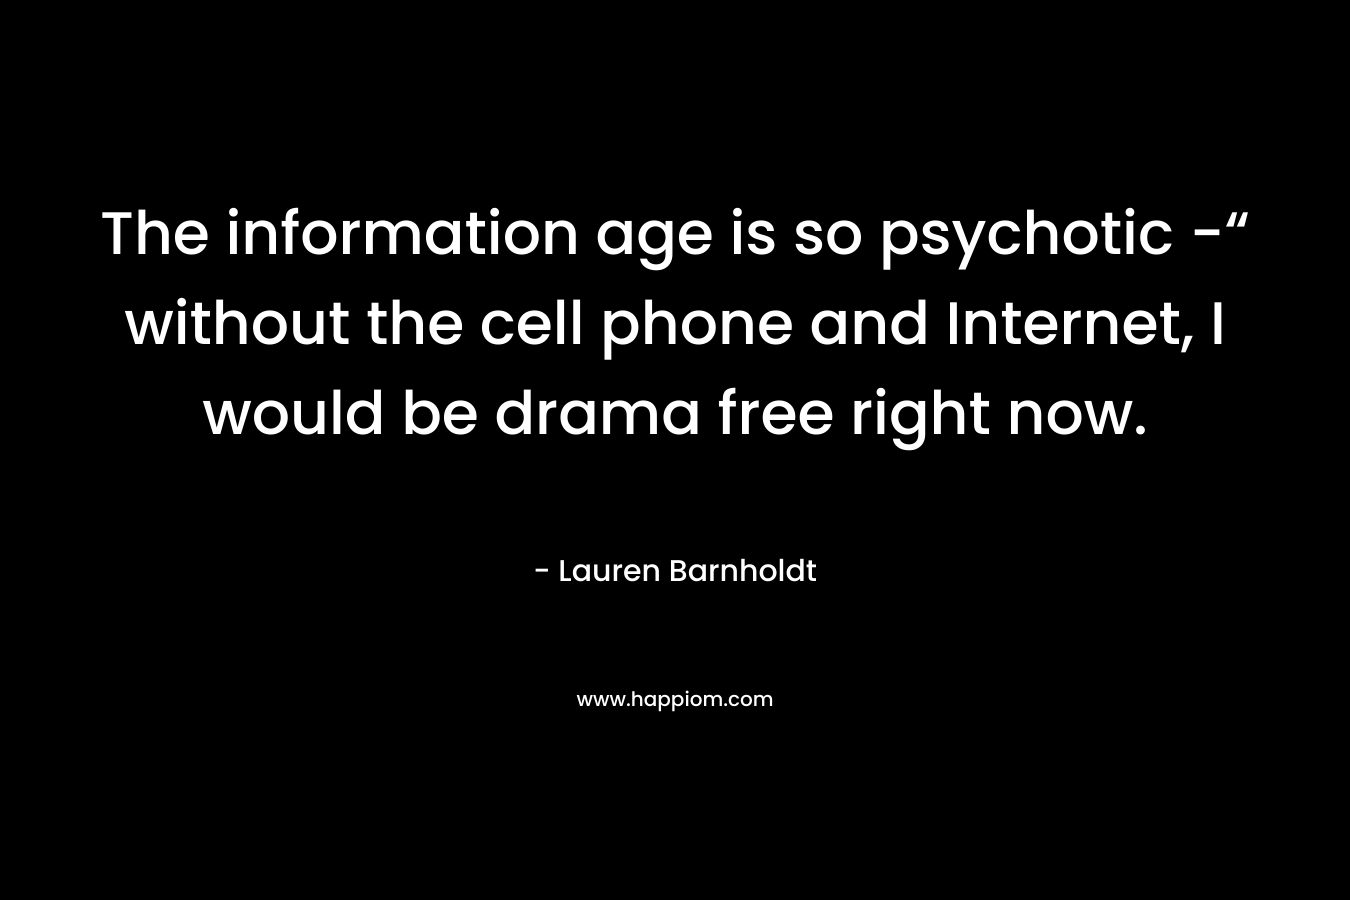 The information age is so psychotic -“ without the cell phone and Internet, I would be drama free right now. – Lauren Barnholdt